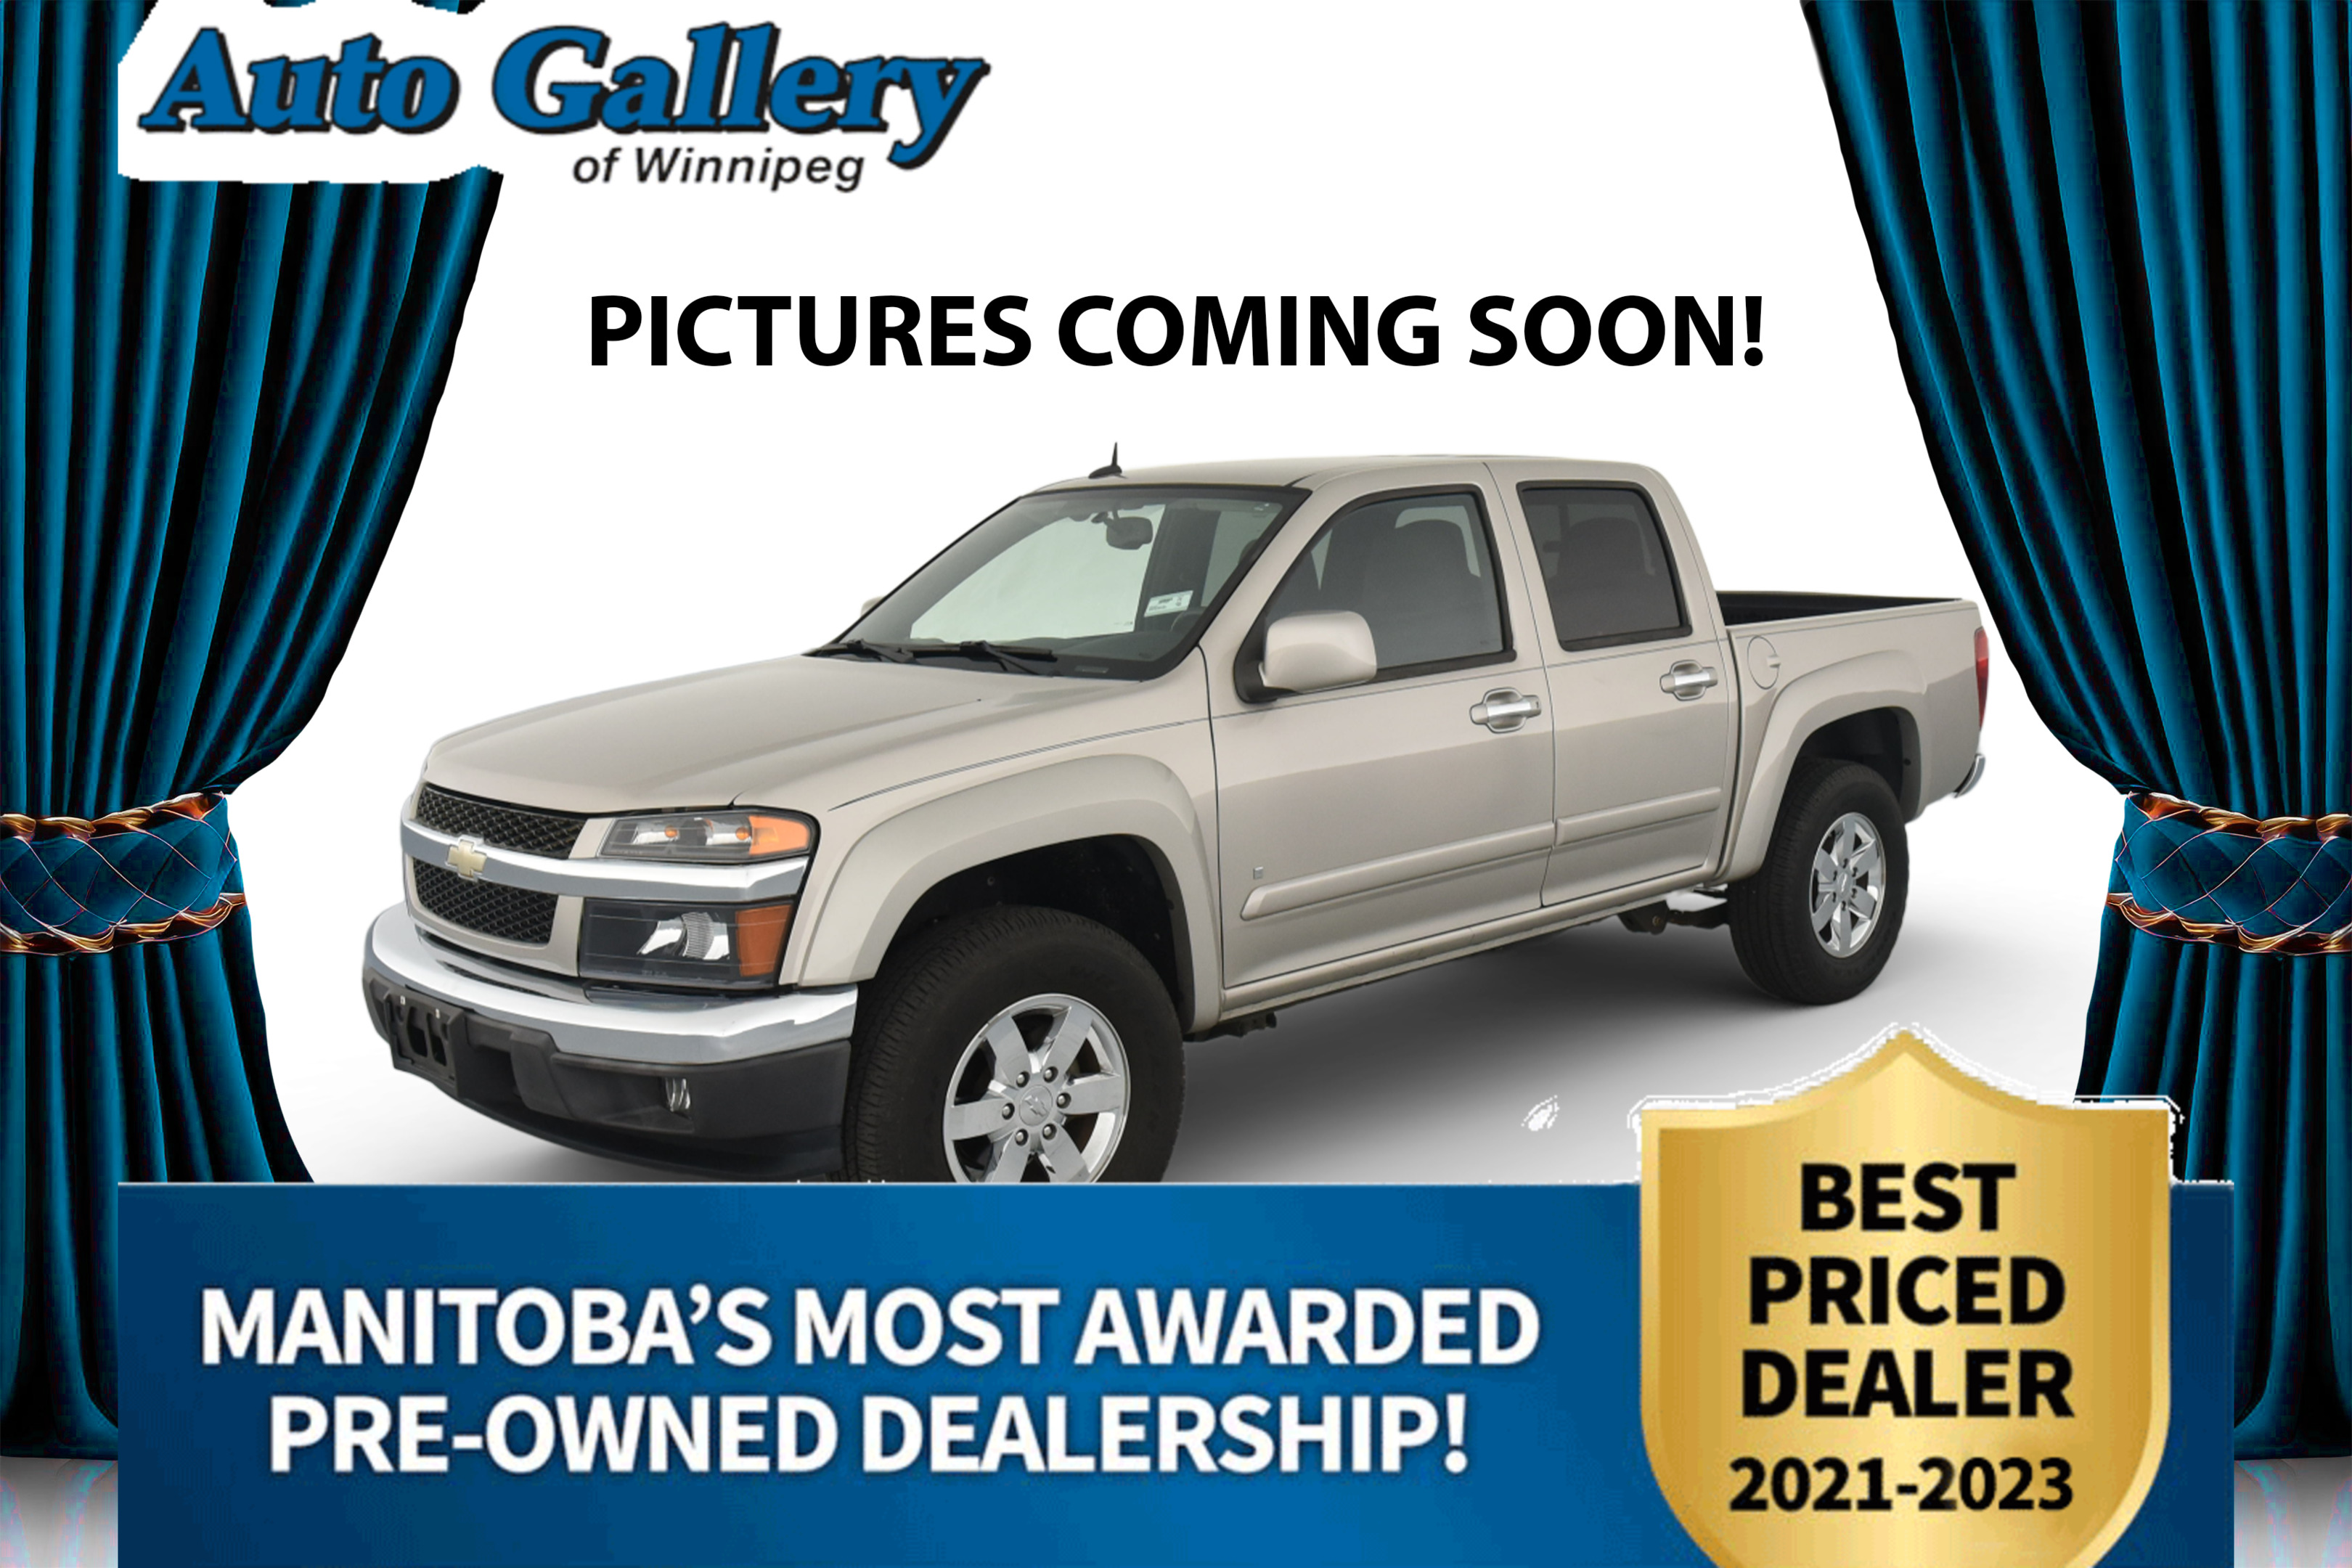 2009 Chevrolet Colorado LT, EXTENDED CAB, RADIO, LOCAL VEHICLE, & MORE! 